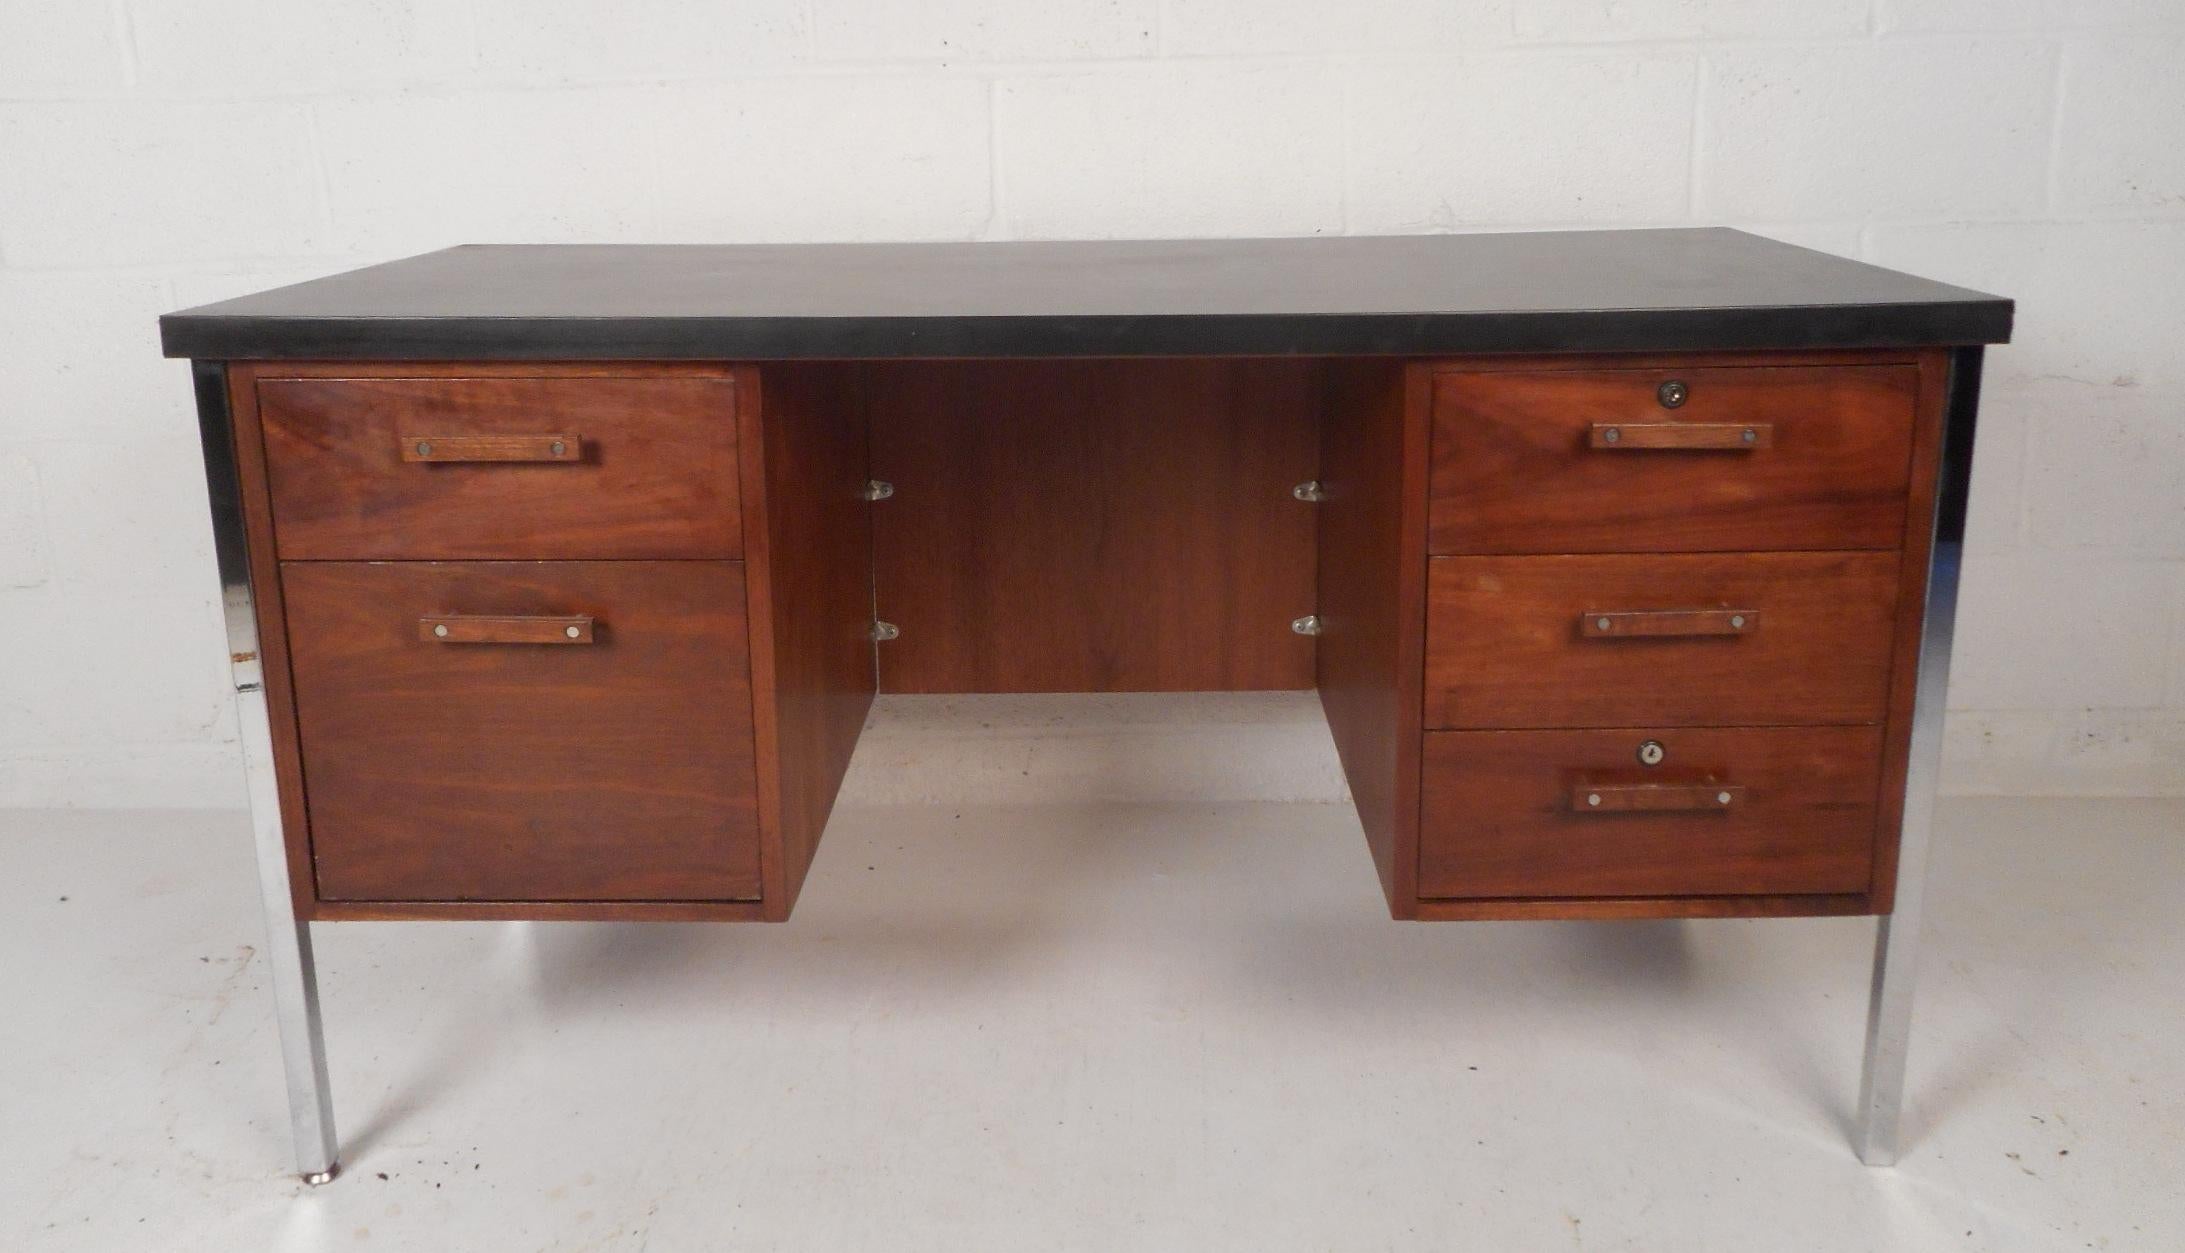 This stunning vintage modern desk features a black painted wood top and chrome legs. A sleek design with a vast amount of storage space within its five hefty drawers. Quality construction with elegant walnut wood grain and unique drawer pulls adding